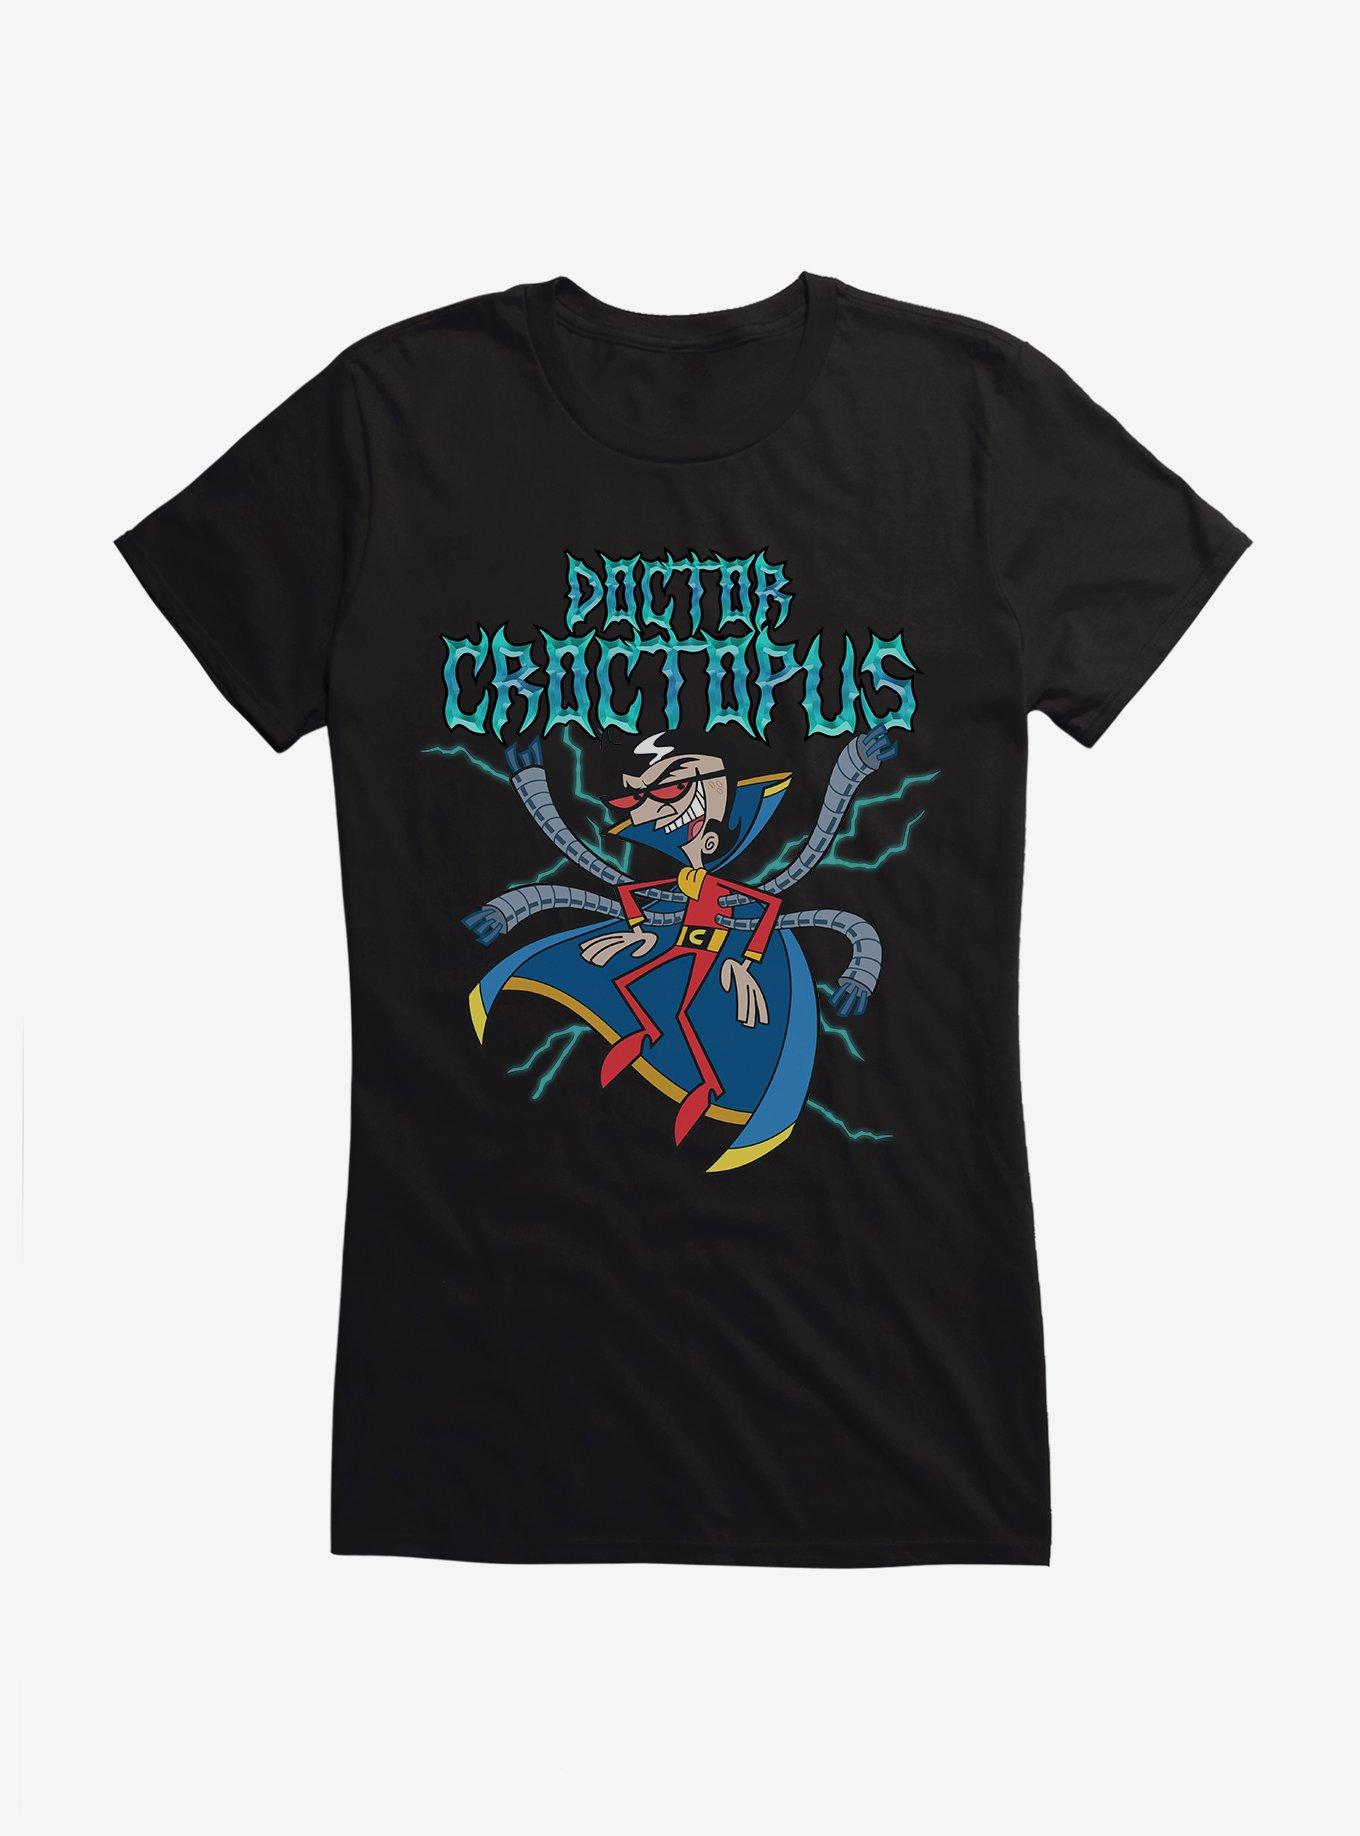 The Fairly Oddparents Doctor Croctopus Girls T-Shirt